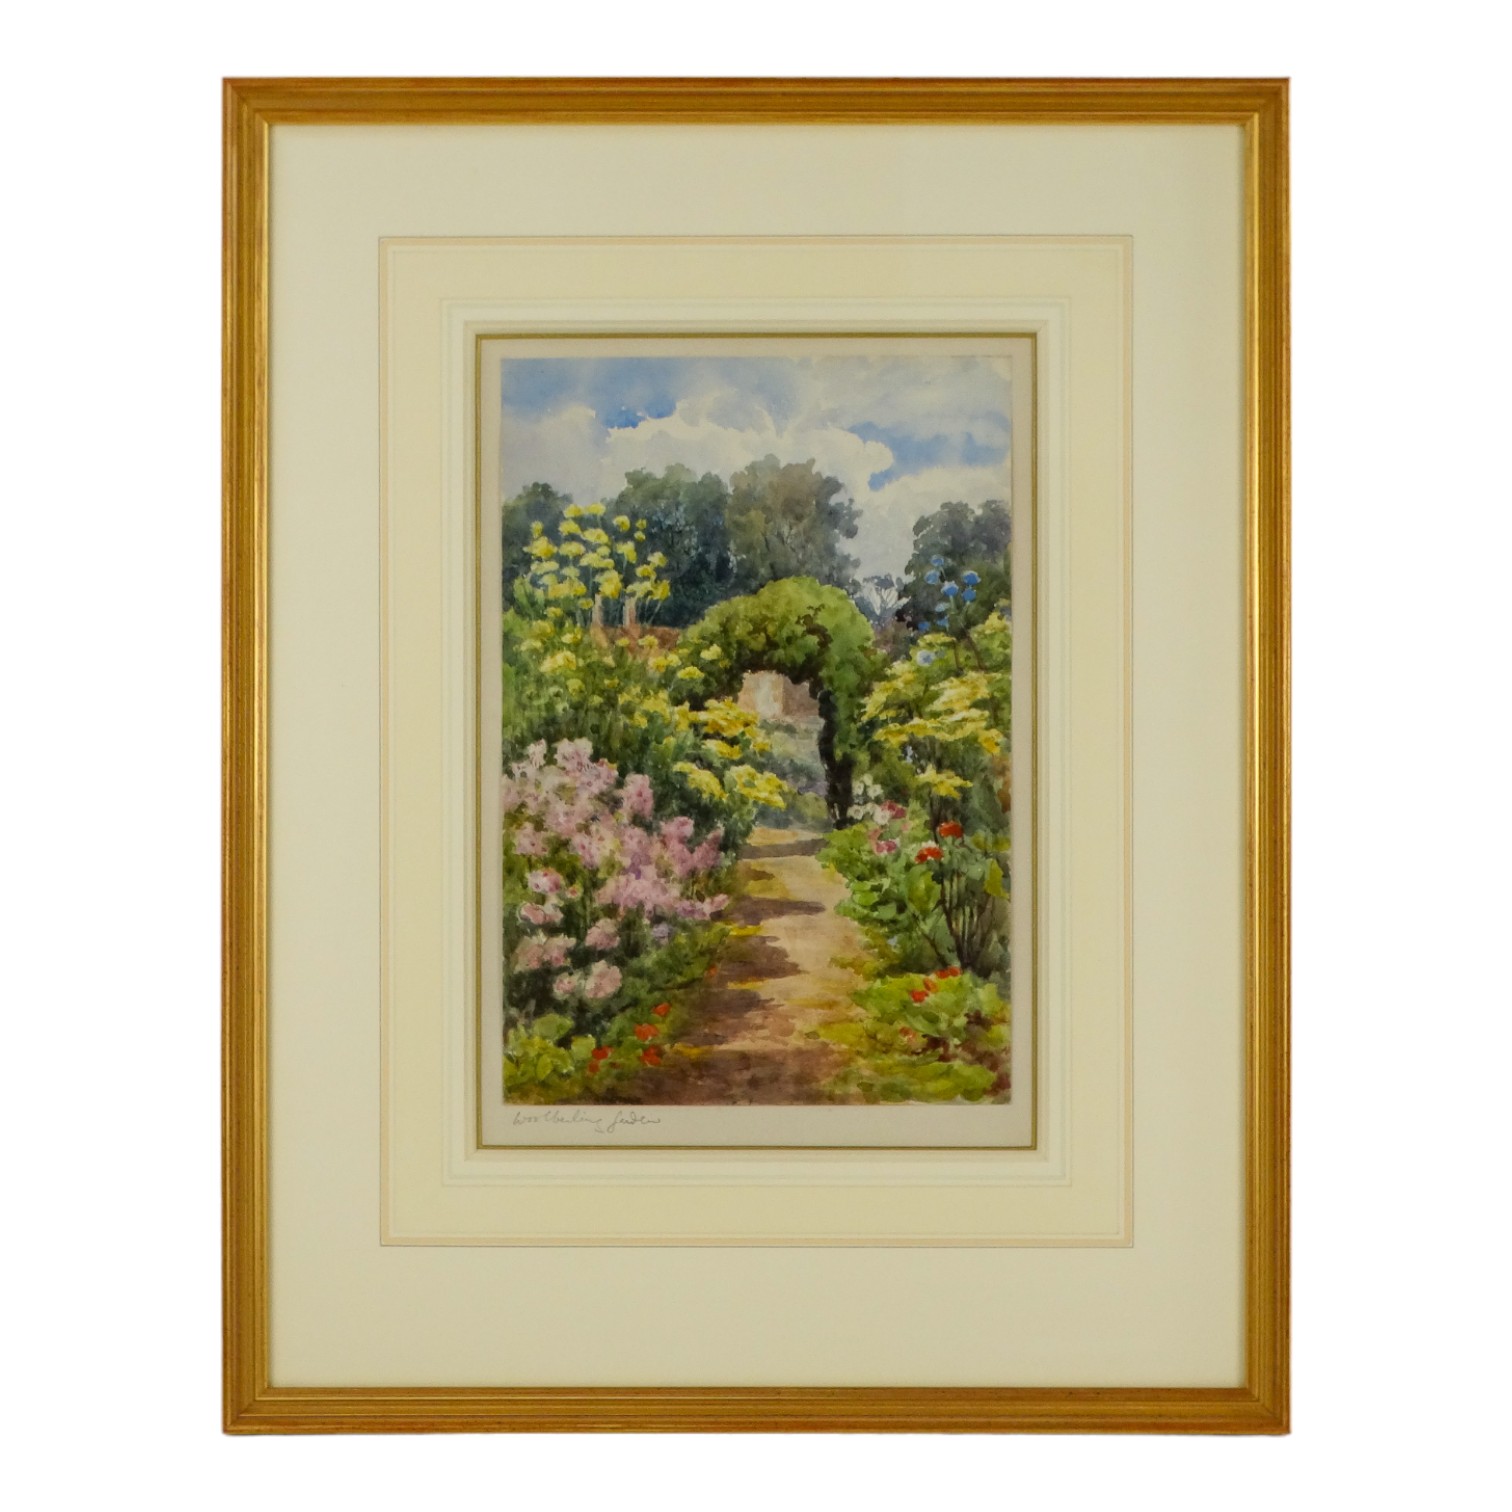 Lady Frances MAXWELL-LYTE (British 1853-1925) Woolbeding Garden Watercolour Framed and glazed - Image 2 of 4